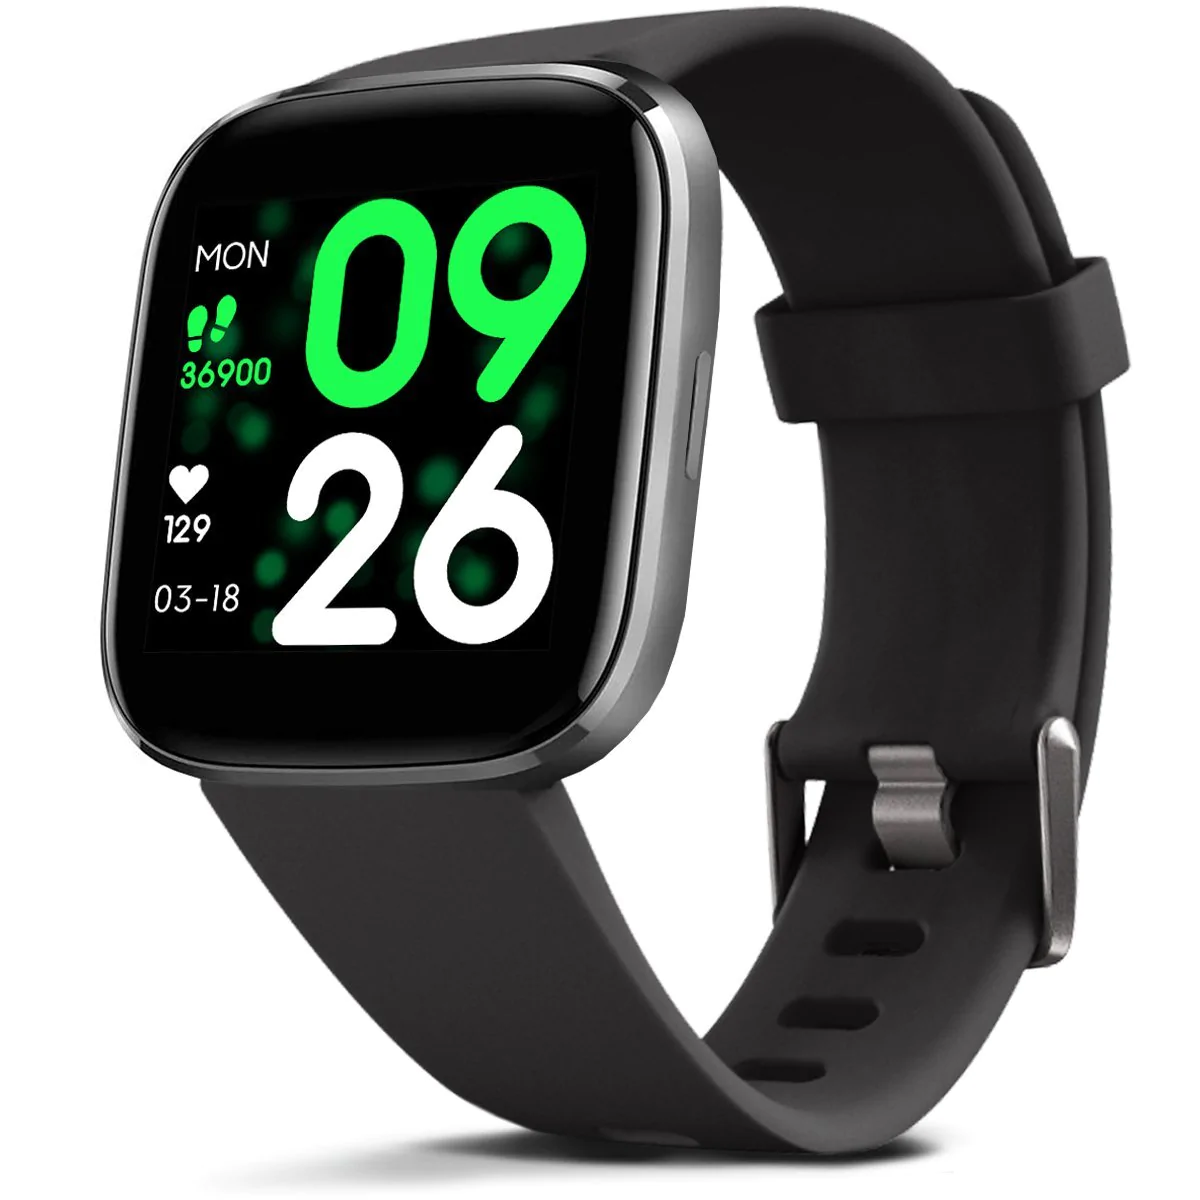 Photo 1 of MorePro GT1Pro Smart Watch, Fitness Tracker with Heart Rate Monitor & Blood Pressure Monitor [Black]